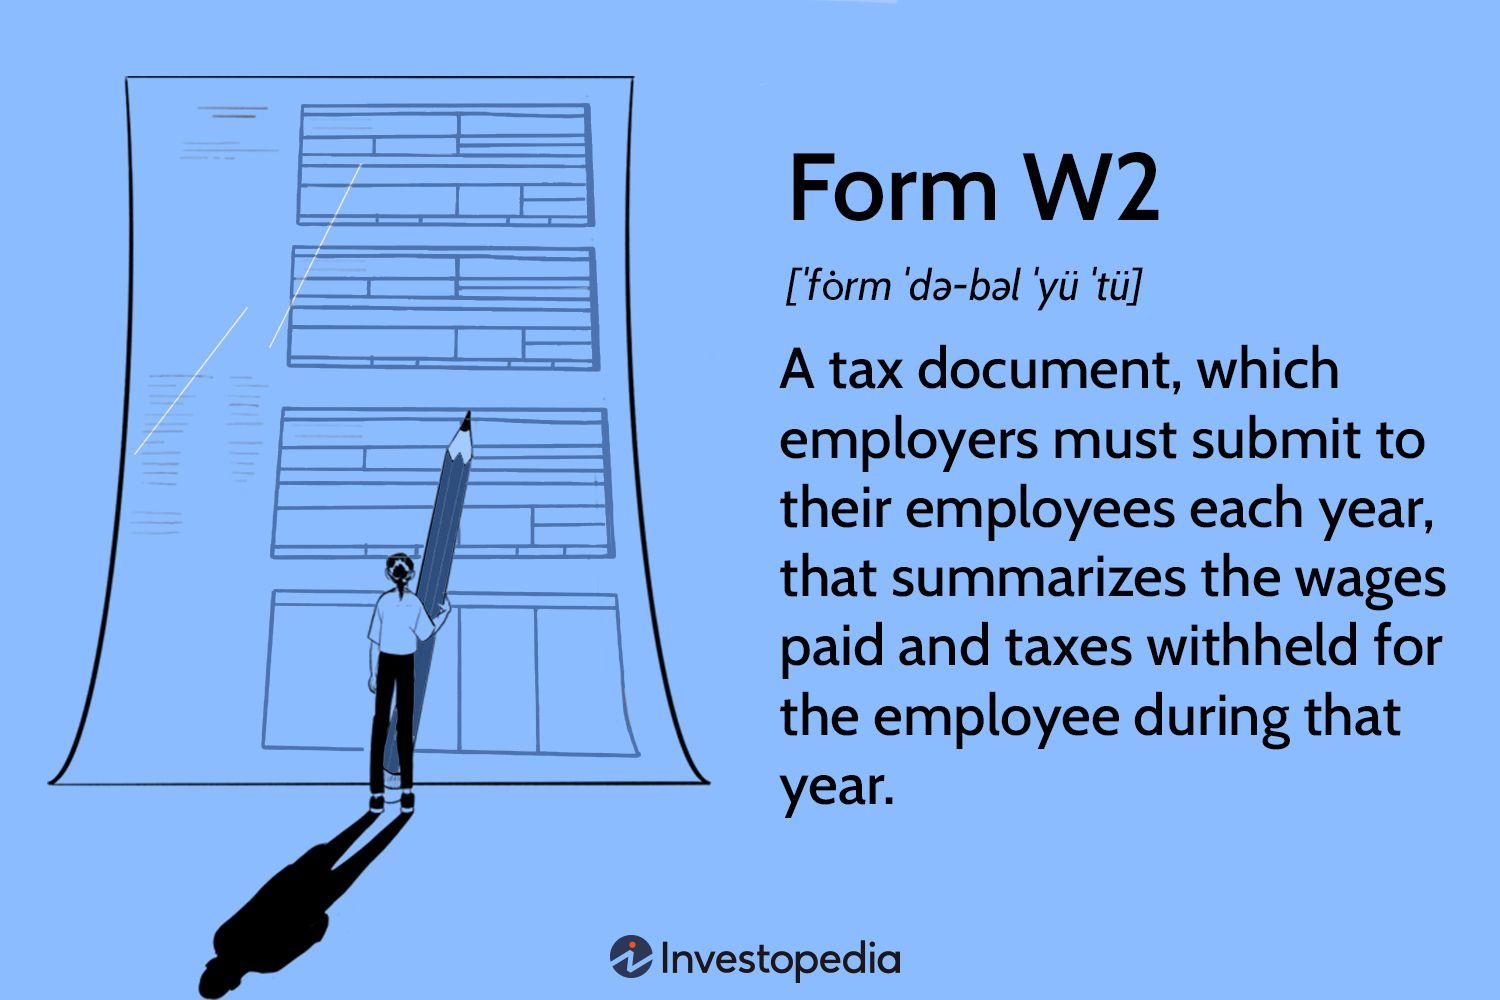 Form W-2 Wage And Tax Statement: What It Is And How To Read It intended for What Is The W2 Form Used For